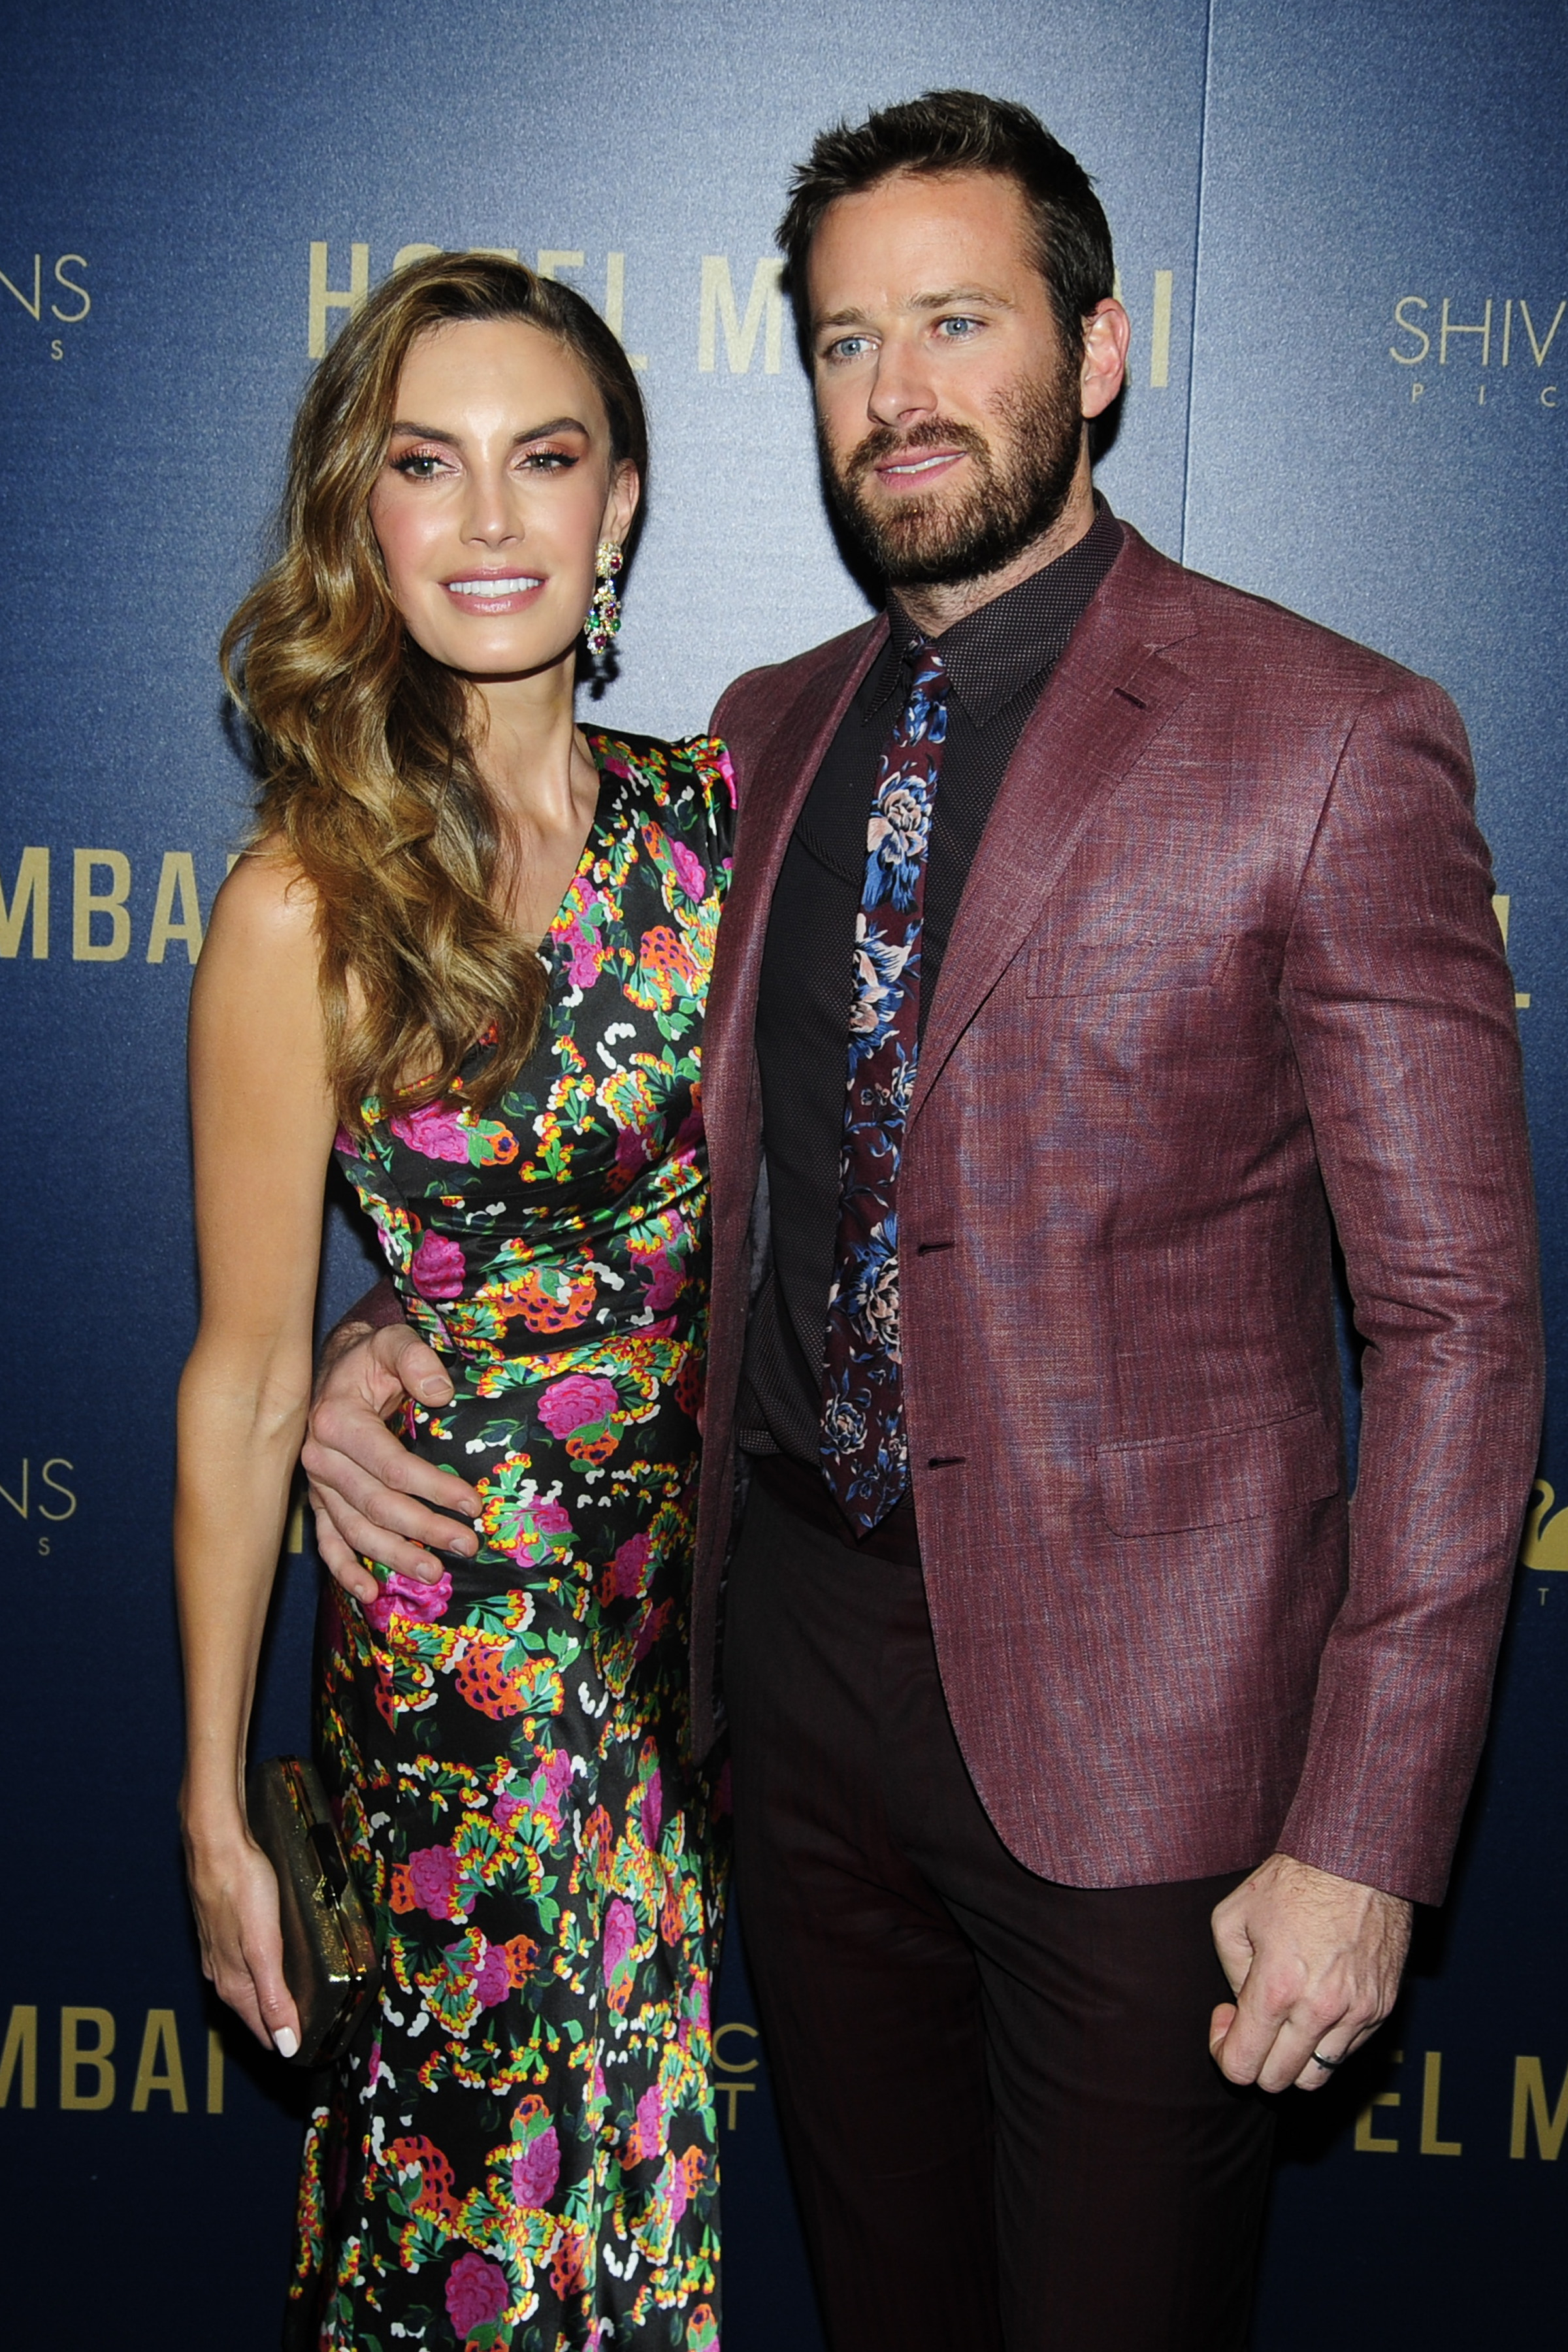 Elizabeth Chambers in a floral dress and Armie Hammer in a maroon suit at an event